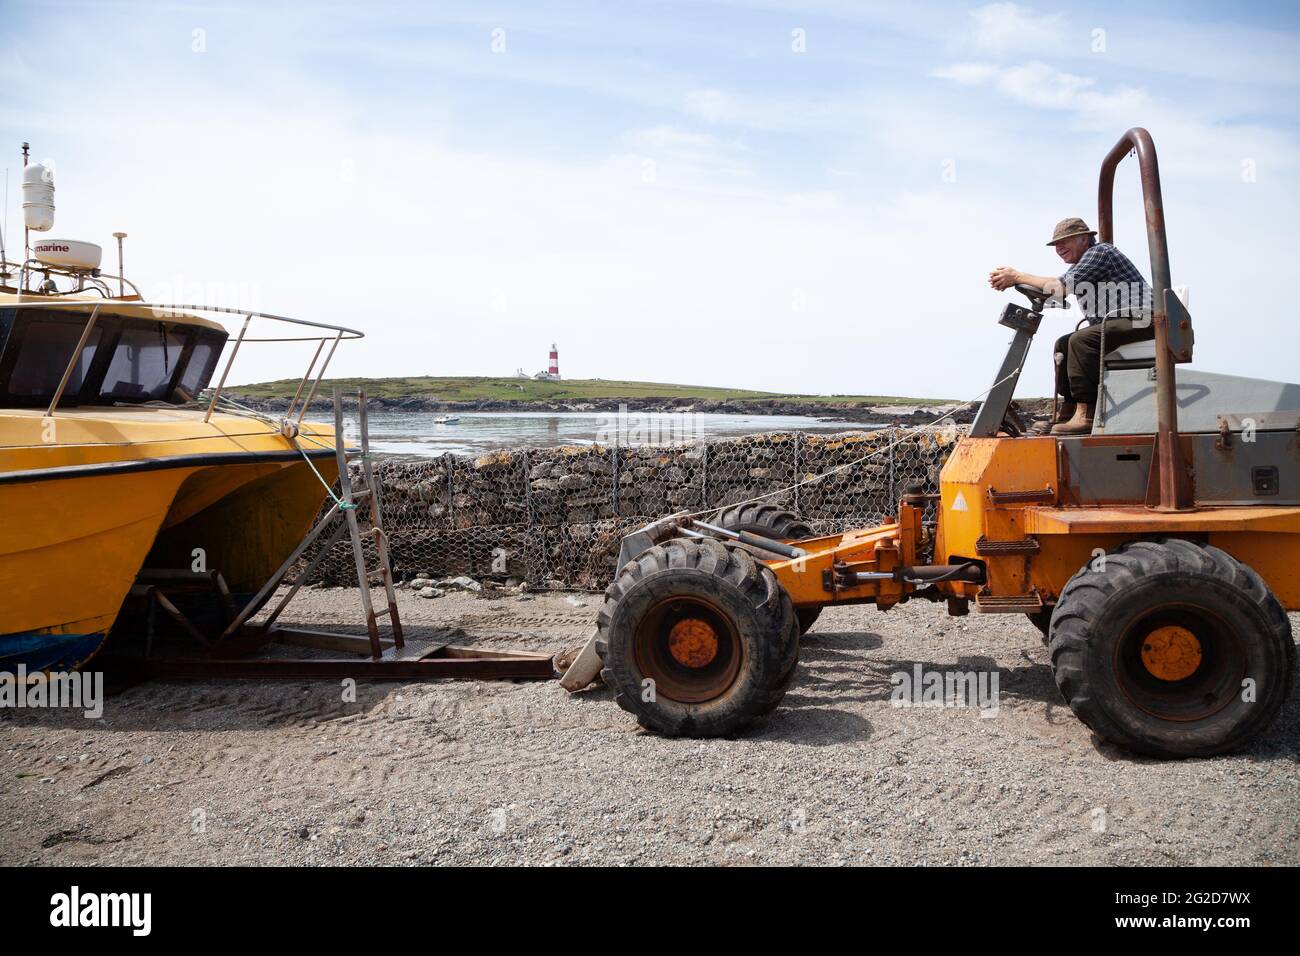 Man wearing a deer stalker hat leans on the steering wheel of a converted dumper truck, launching a yellow ferry boat at Ynys Enlli / Bardsey Island Stock Photo